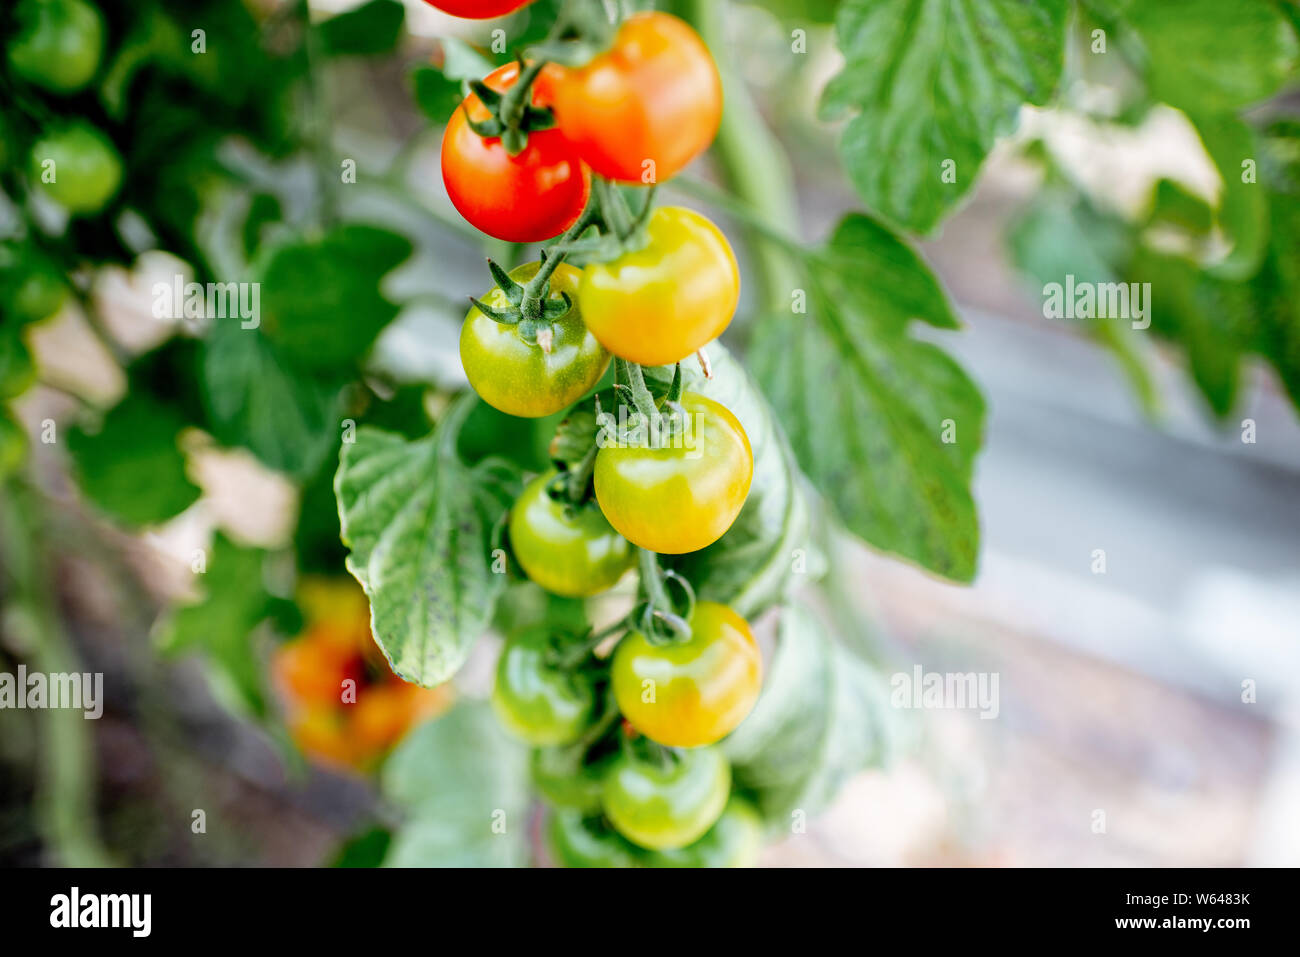 Branch with growing cherry tomatoes on the organic plantation, close-up view Stock Photo